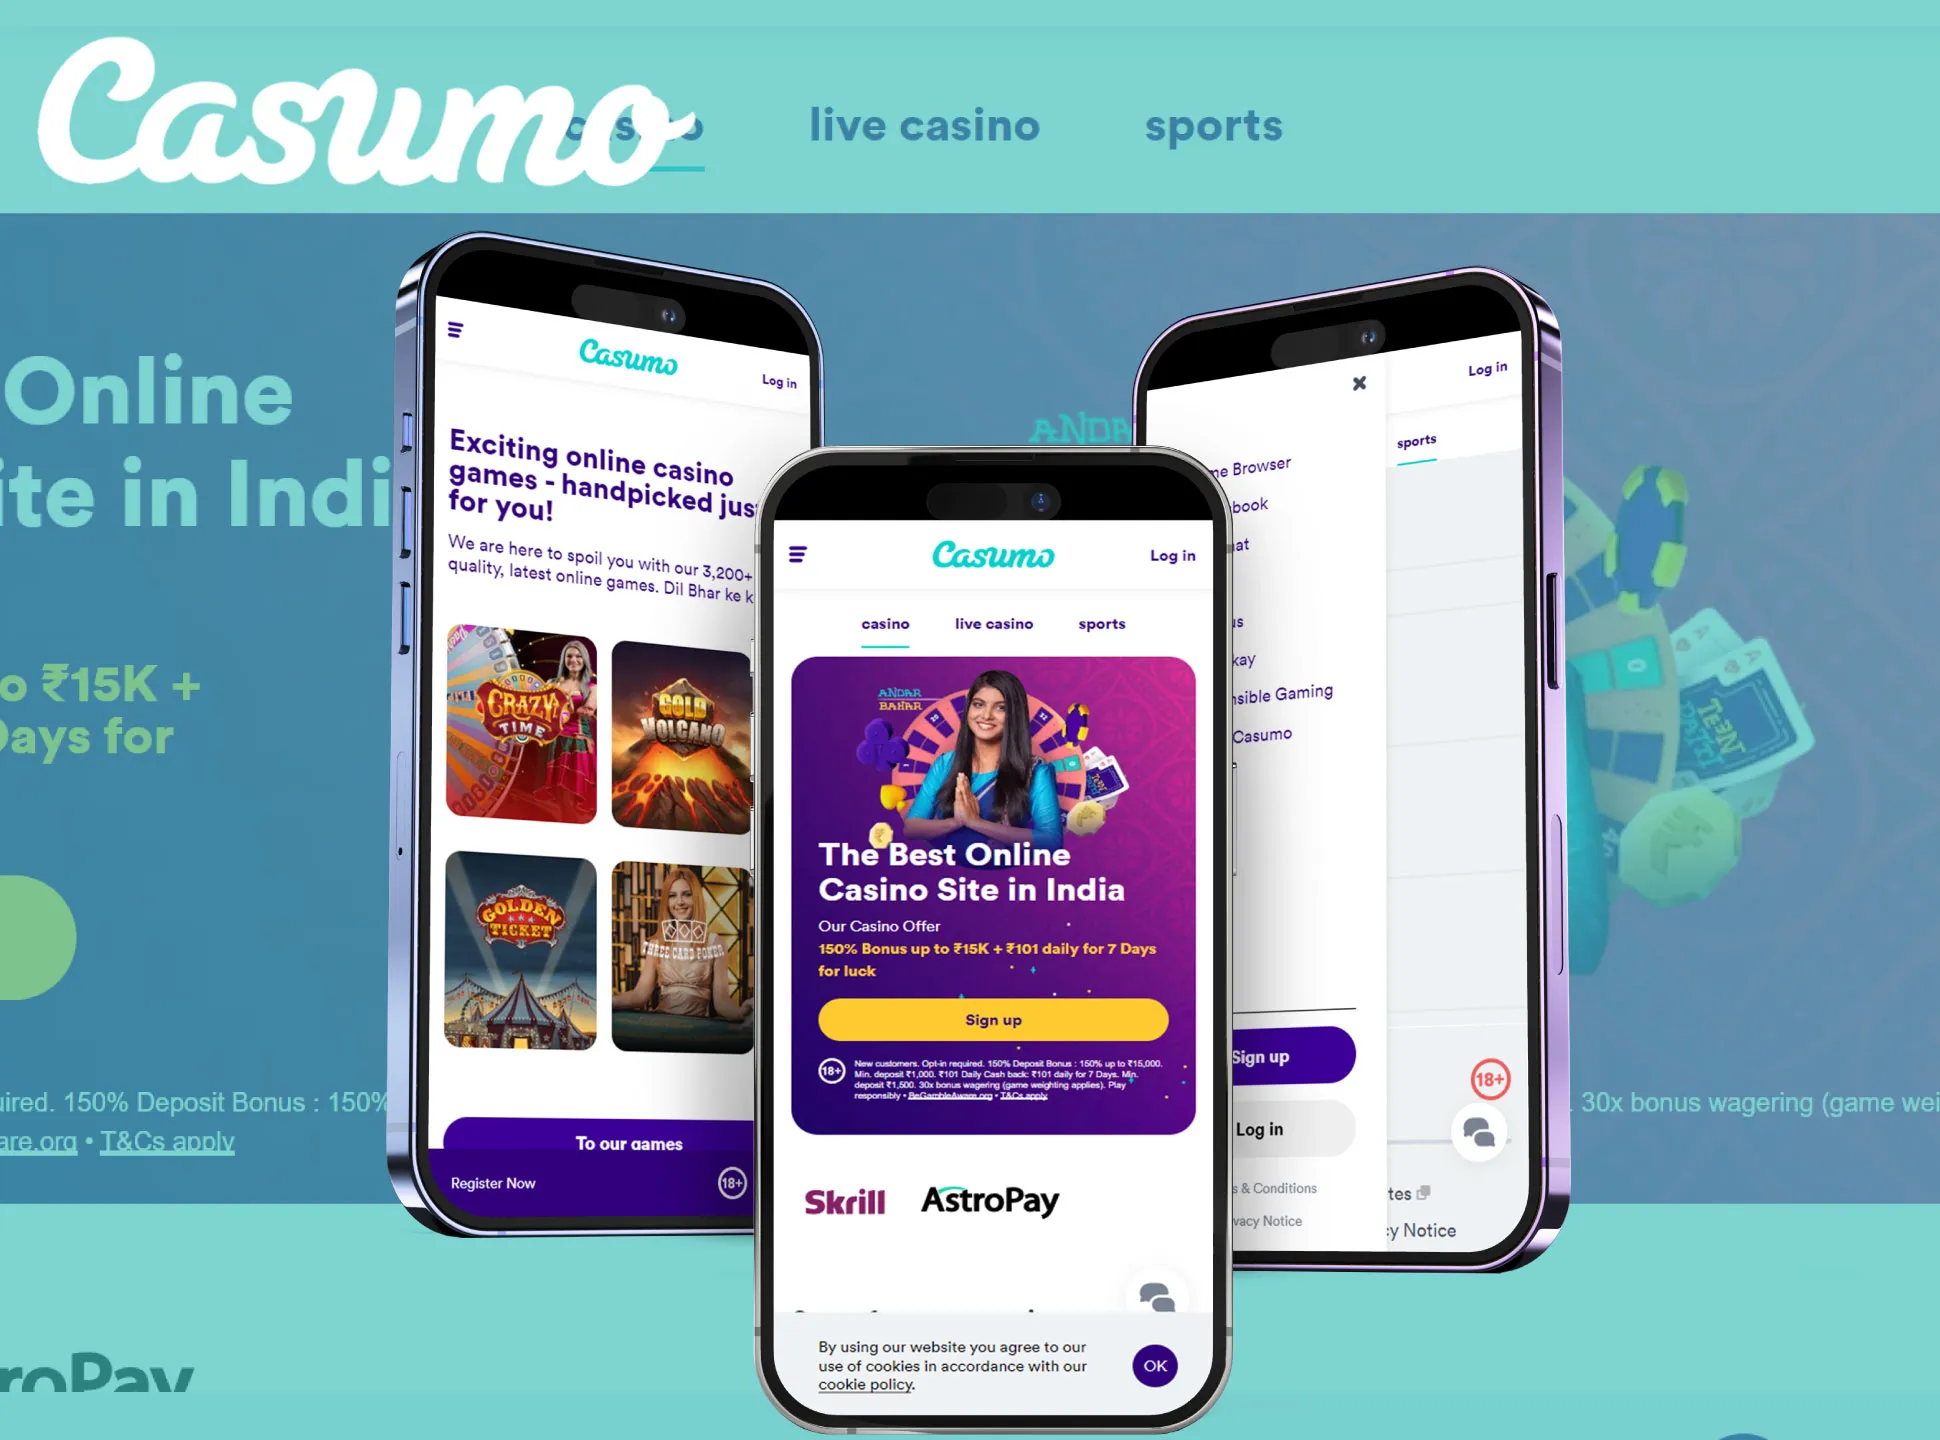 All the Casumo app features help you with betting and casino gaming.